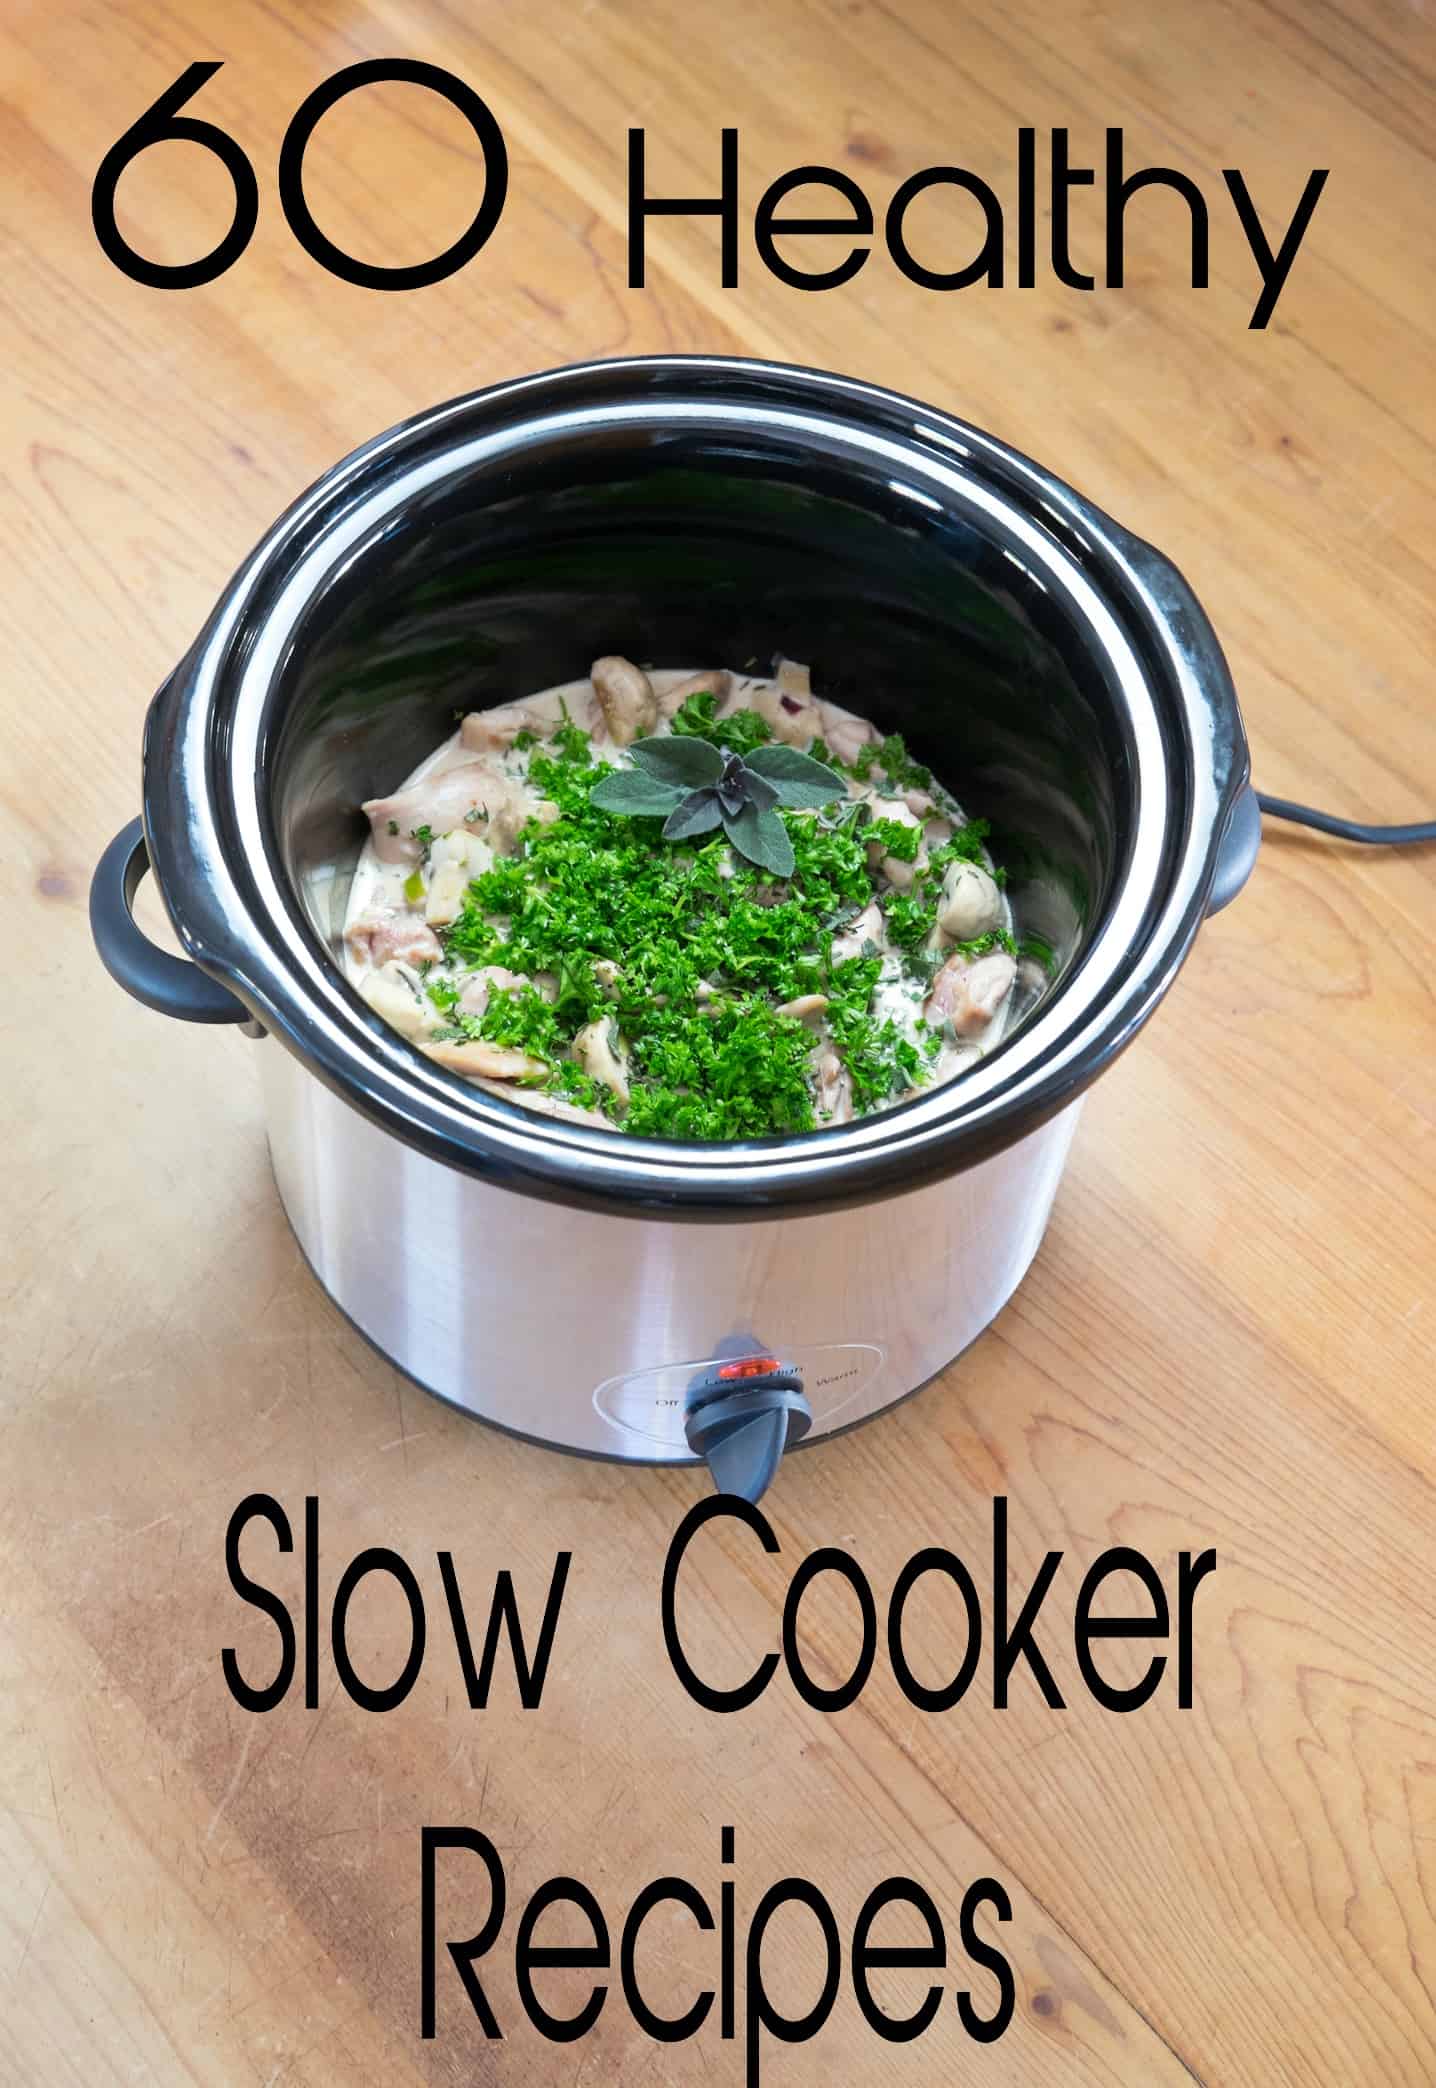 60 easy and healthy slow cooker recipes - Eat Well Spend Smart